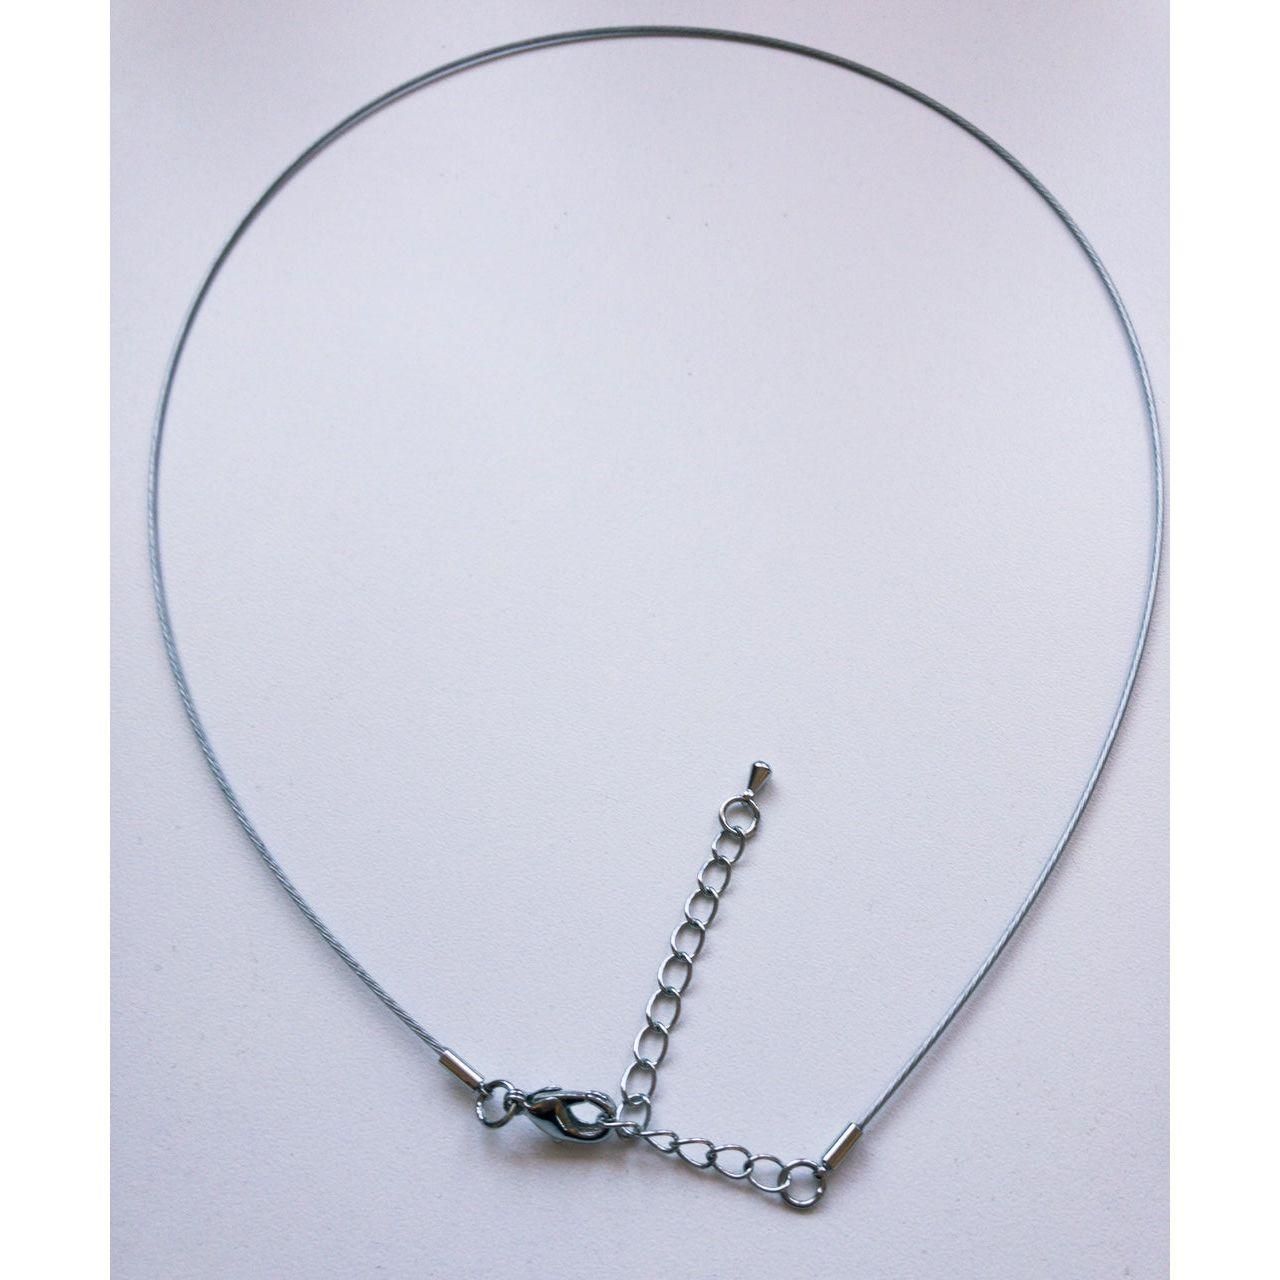 silver non-tarnish chain for pendants, adjustable length 18 - 20 inches